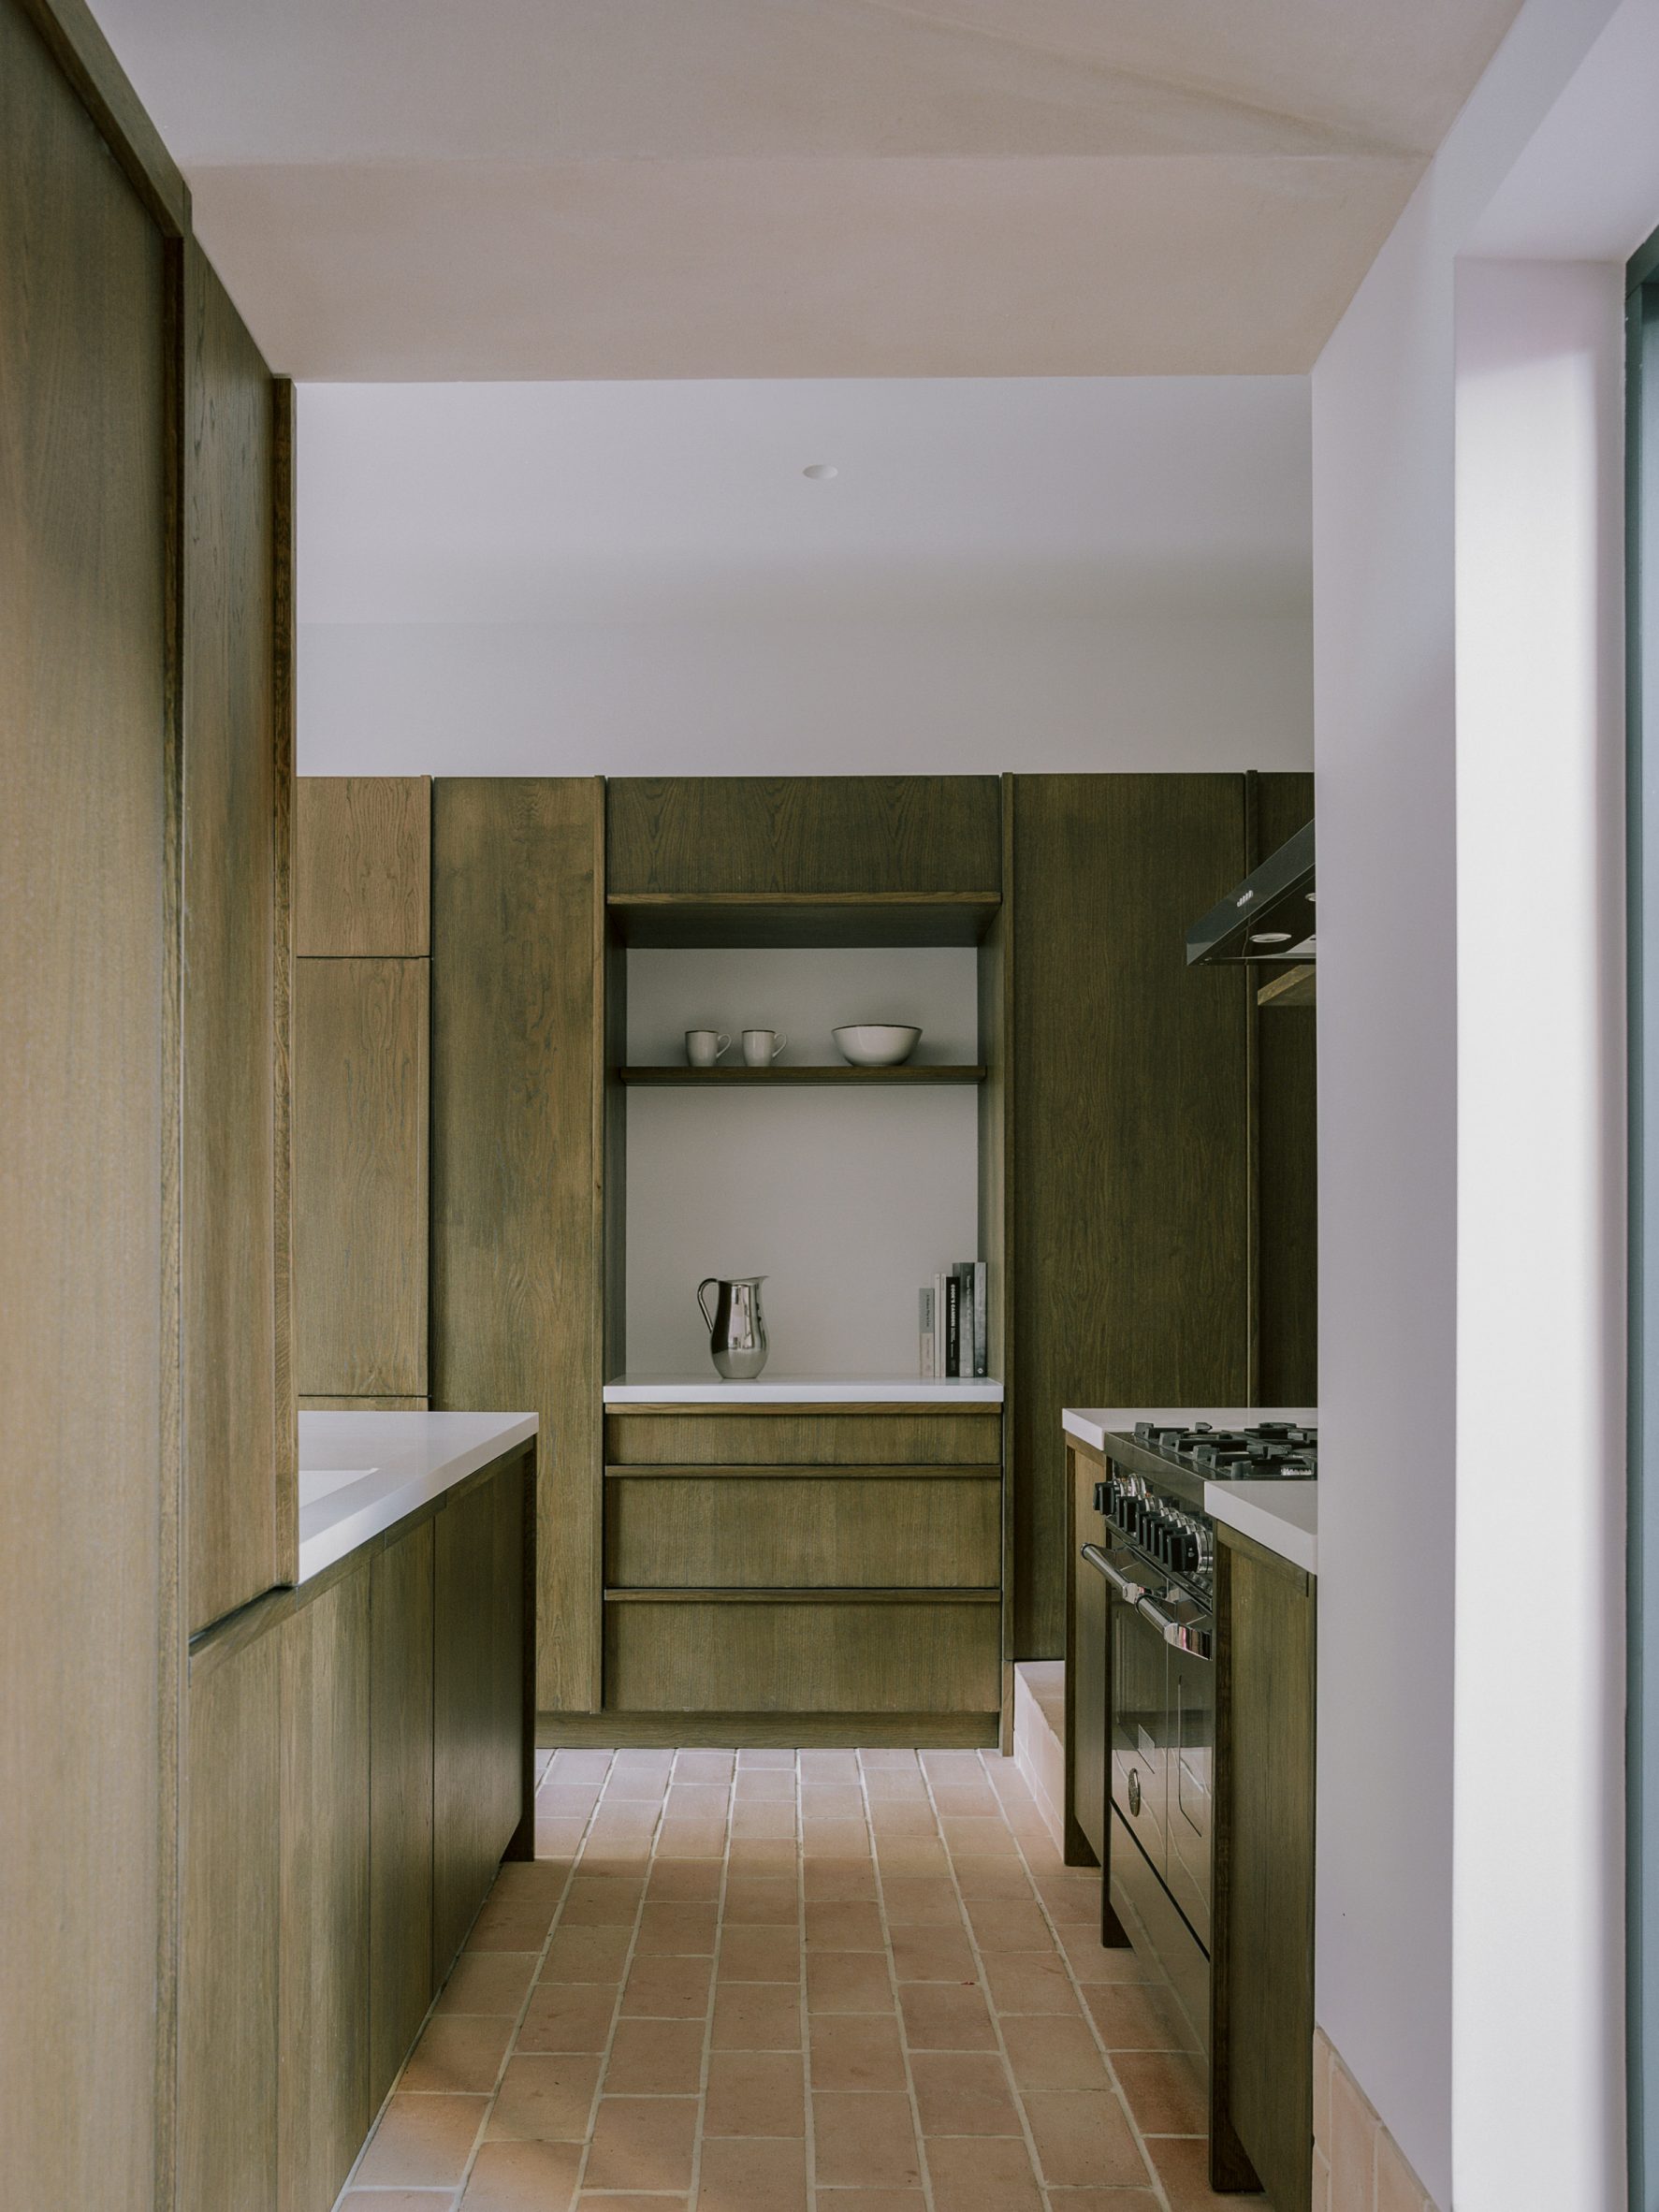 Oak kitchen cabinetry with small nook in Aperture House